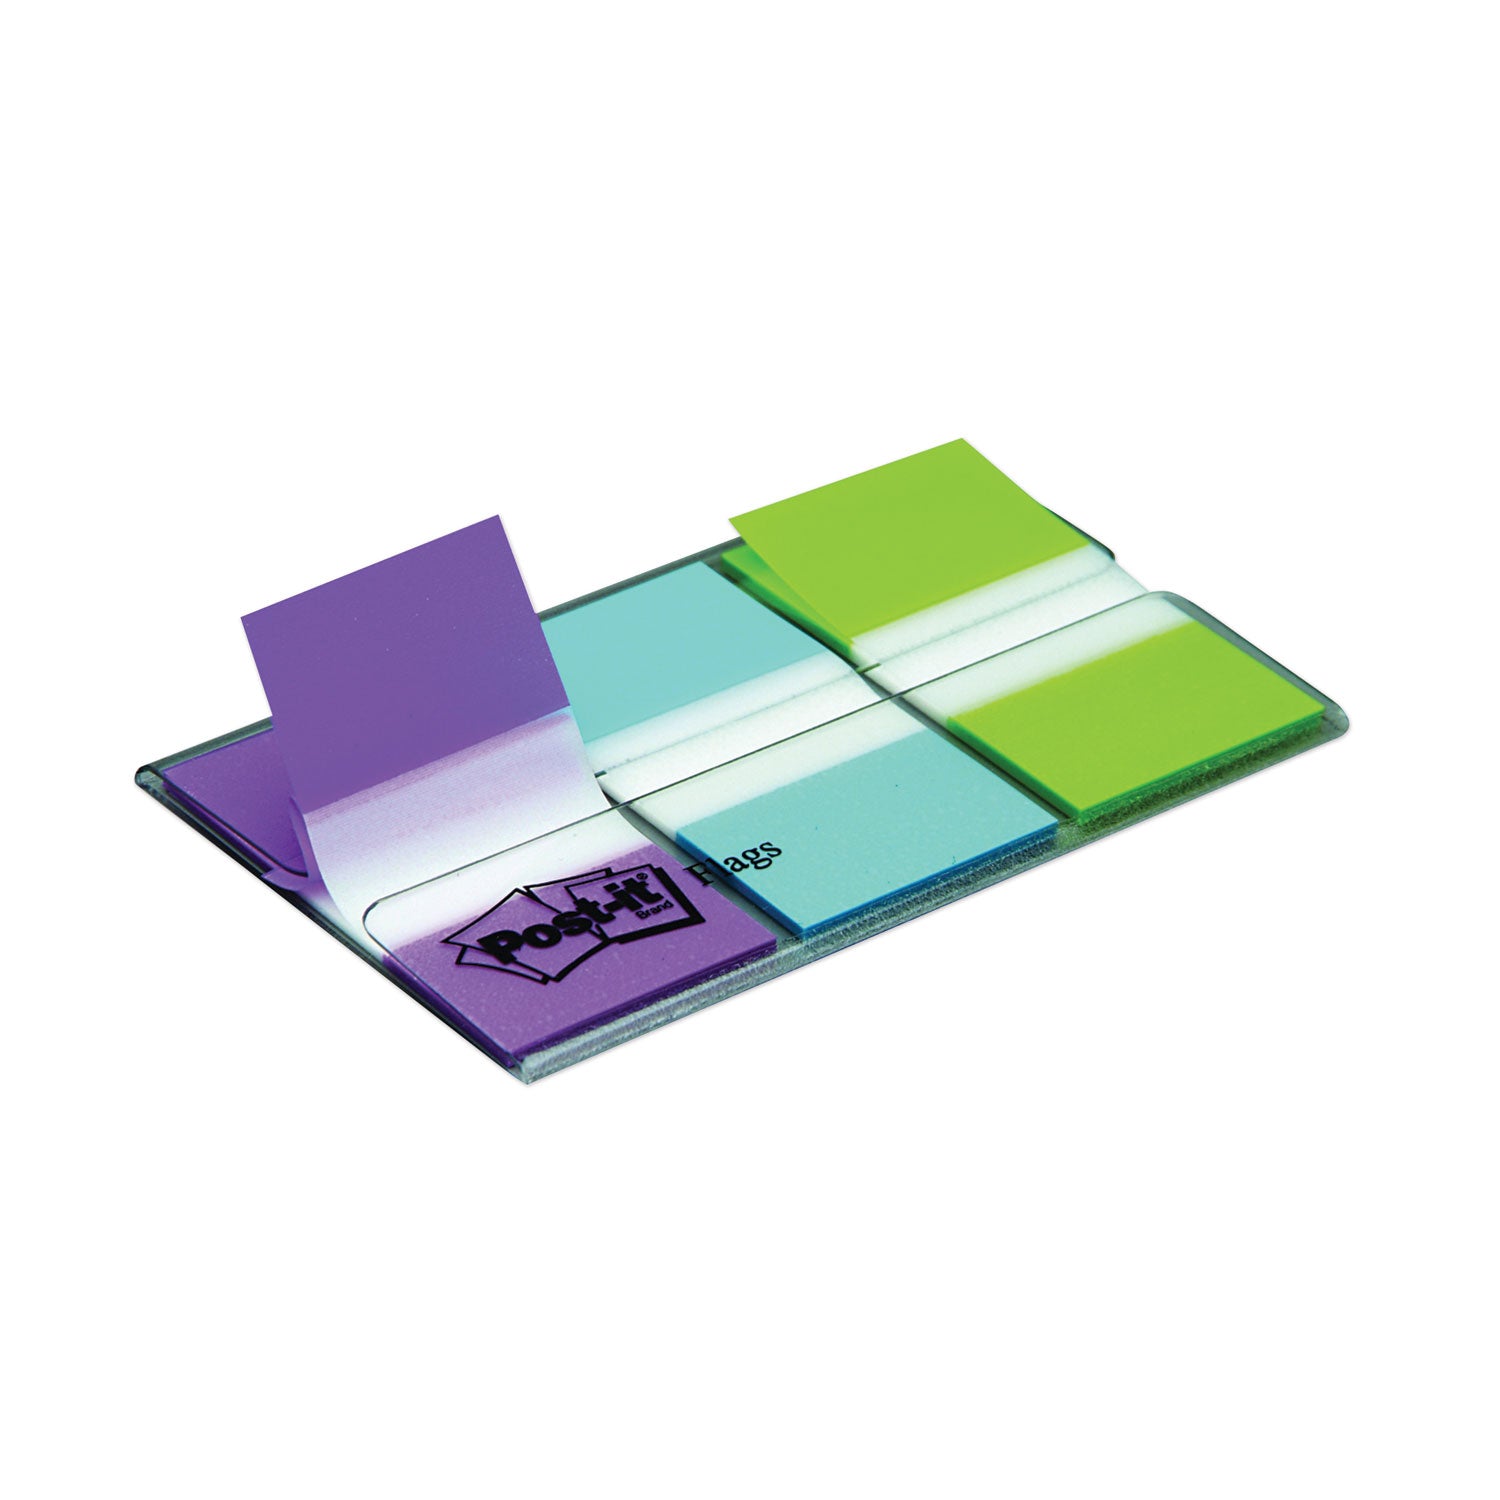 094-wide-flags-with-dispenser-bright-blue-bright-green-purple-60-flags_mmm70071493244 - 2